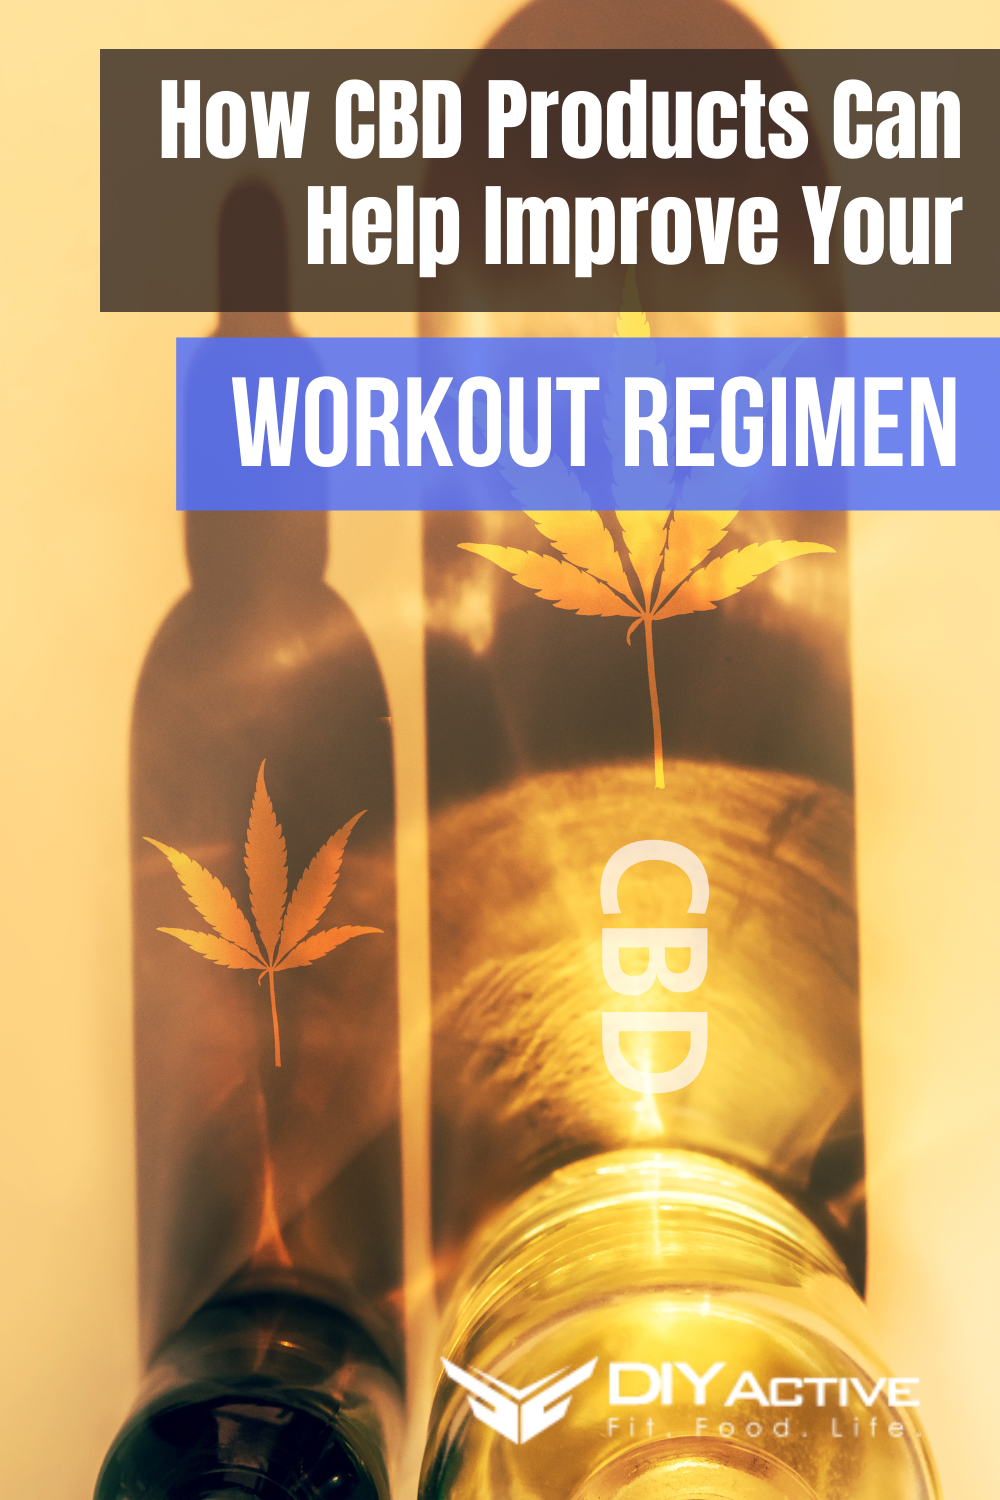 How CBD Products Can Help Improve Your Workout Regimen